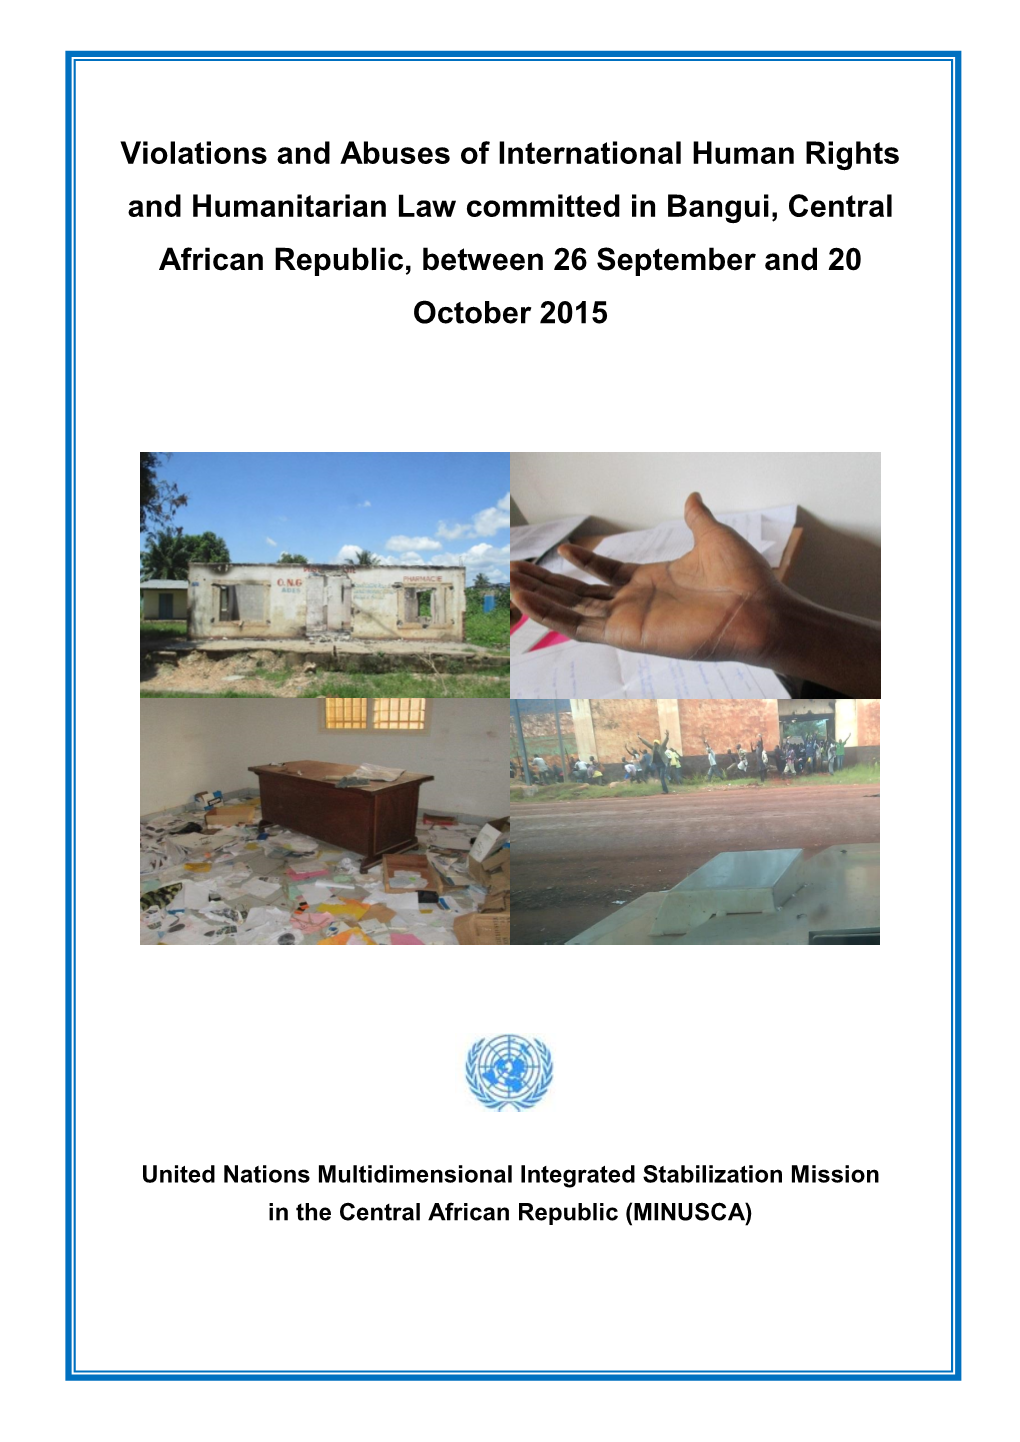 Violations and Abuses of International Human Rights and Humanitarian Law Committed in Bangui, Central African Republic, Between 26 September and 20 October 2015